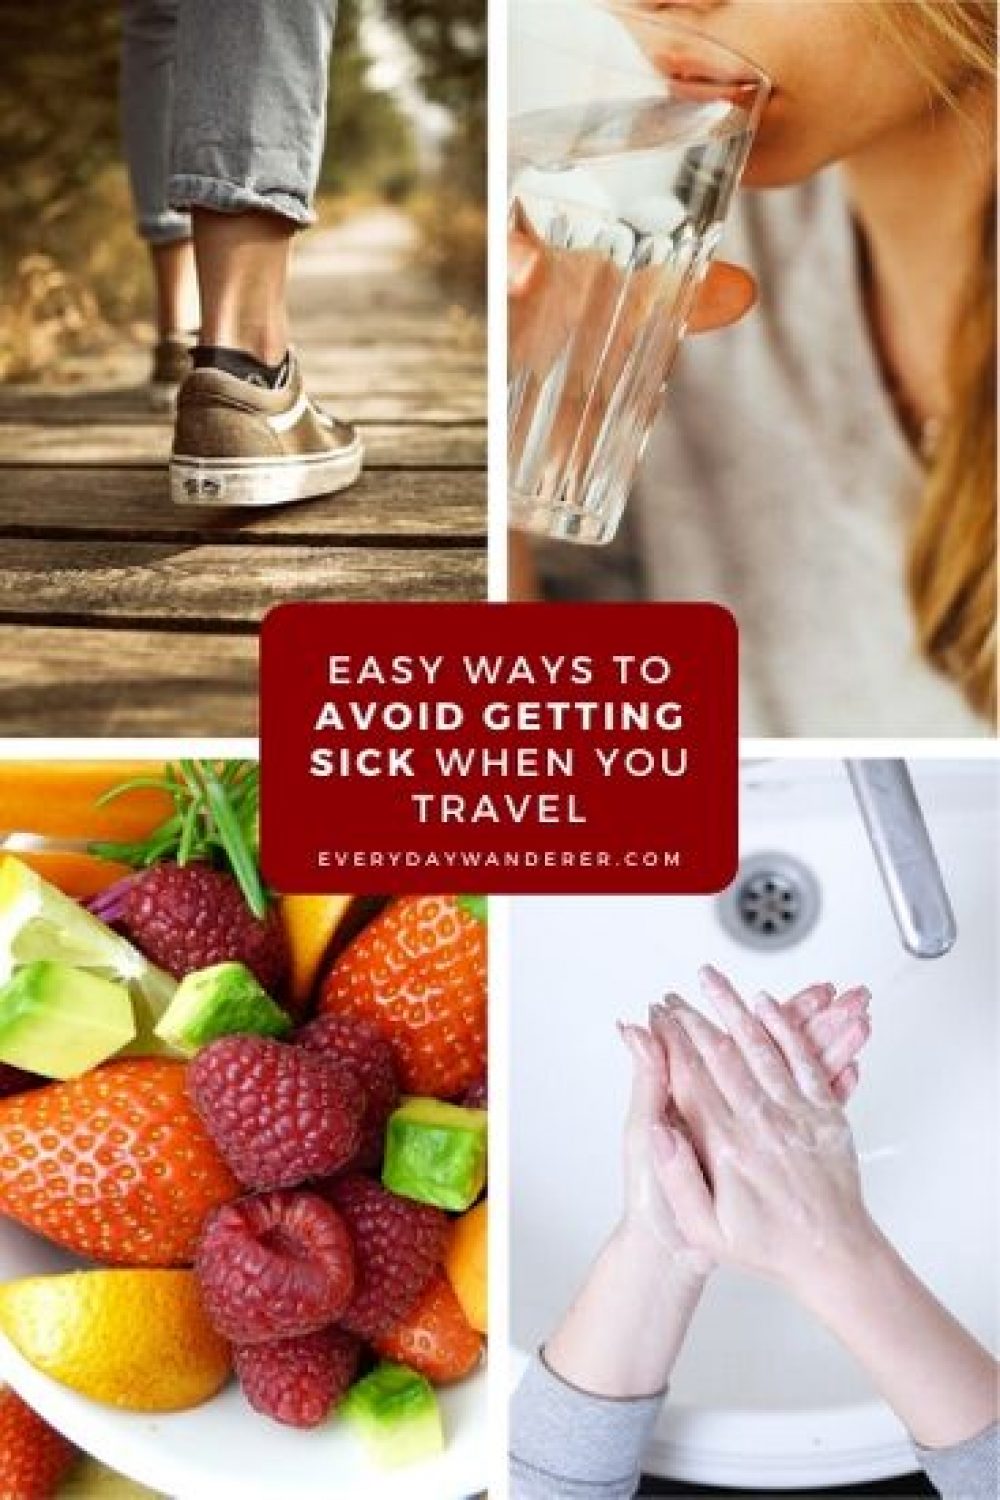 Easy ways to avoid getting sick while traveling. Tips to help you avoid getting sick on a plane. Follow these avoid getting sick tips like stay hydrated, eat healthy, exercise, get a good night's sleep, take vitamin C, and more.